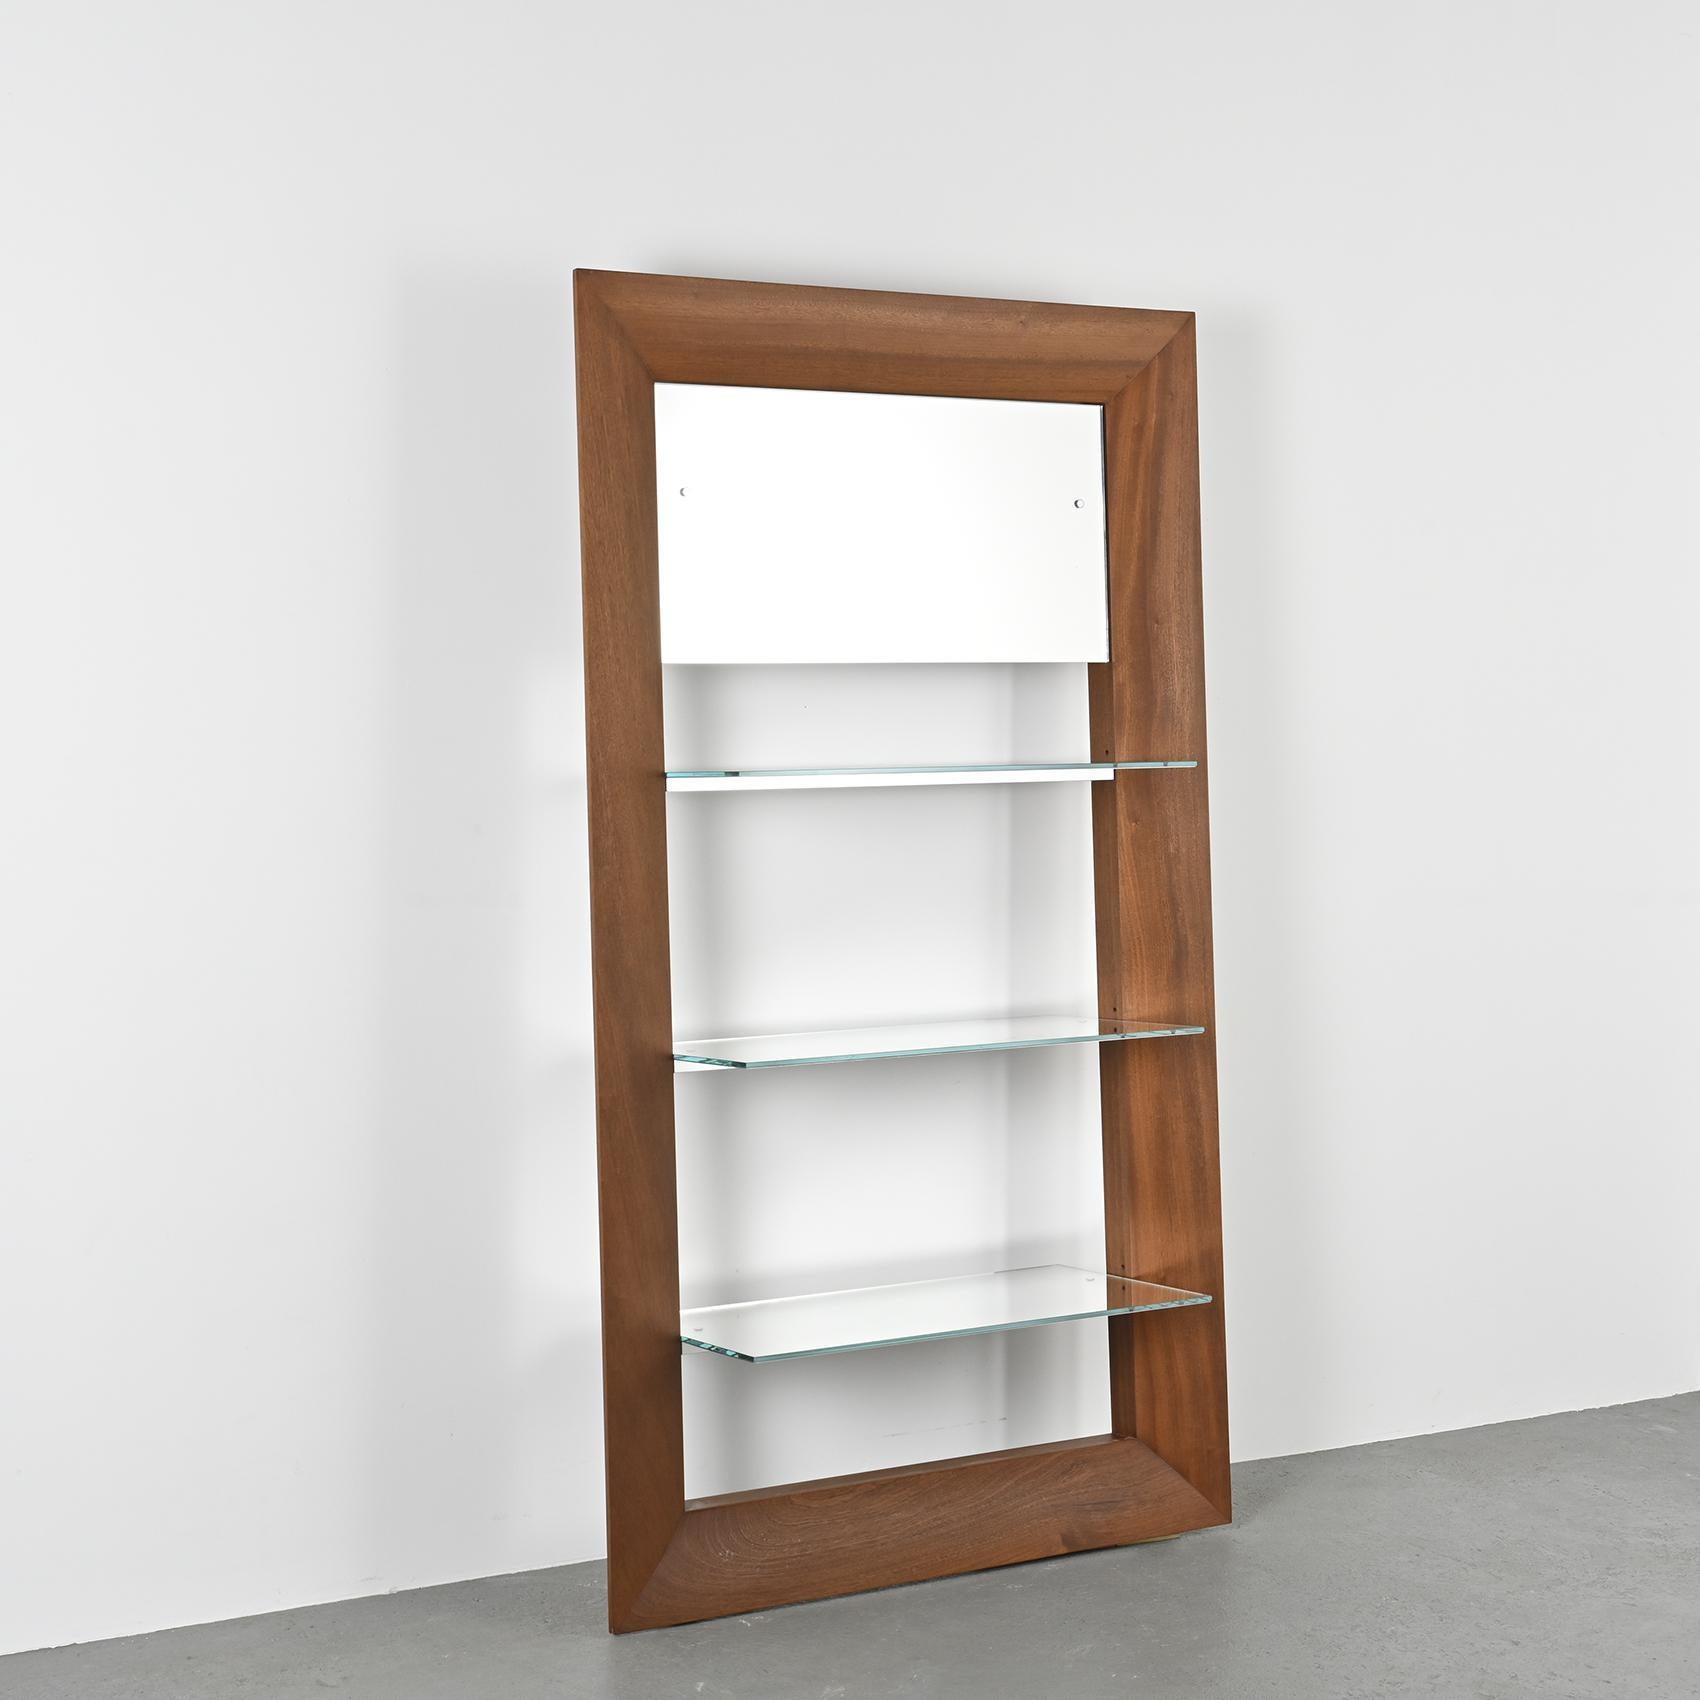 A Pair of Modular Mirror-Bookshelves by Philippe Starck, Driade 2007 For Sale 1